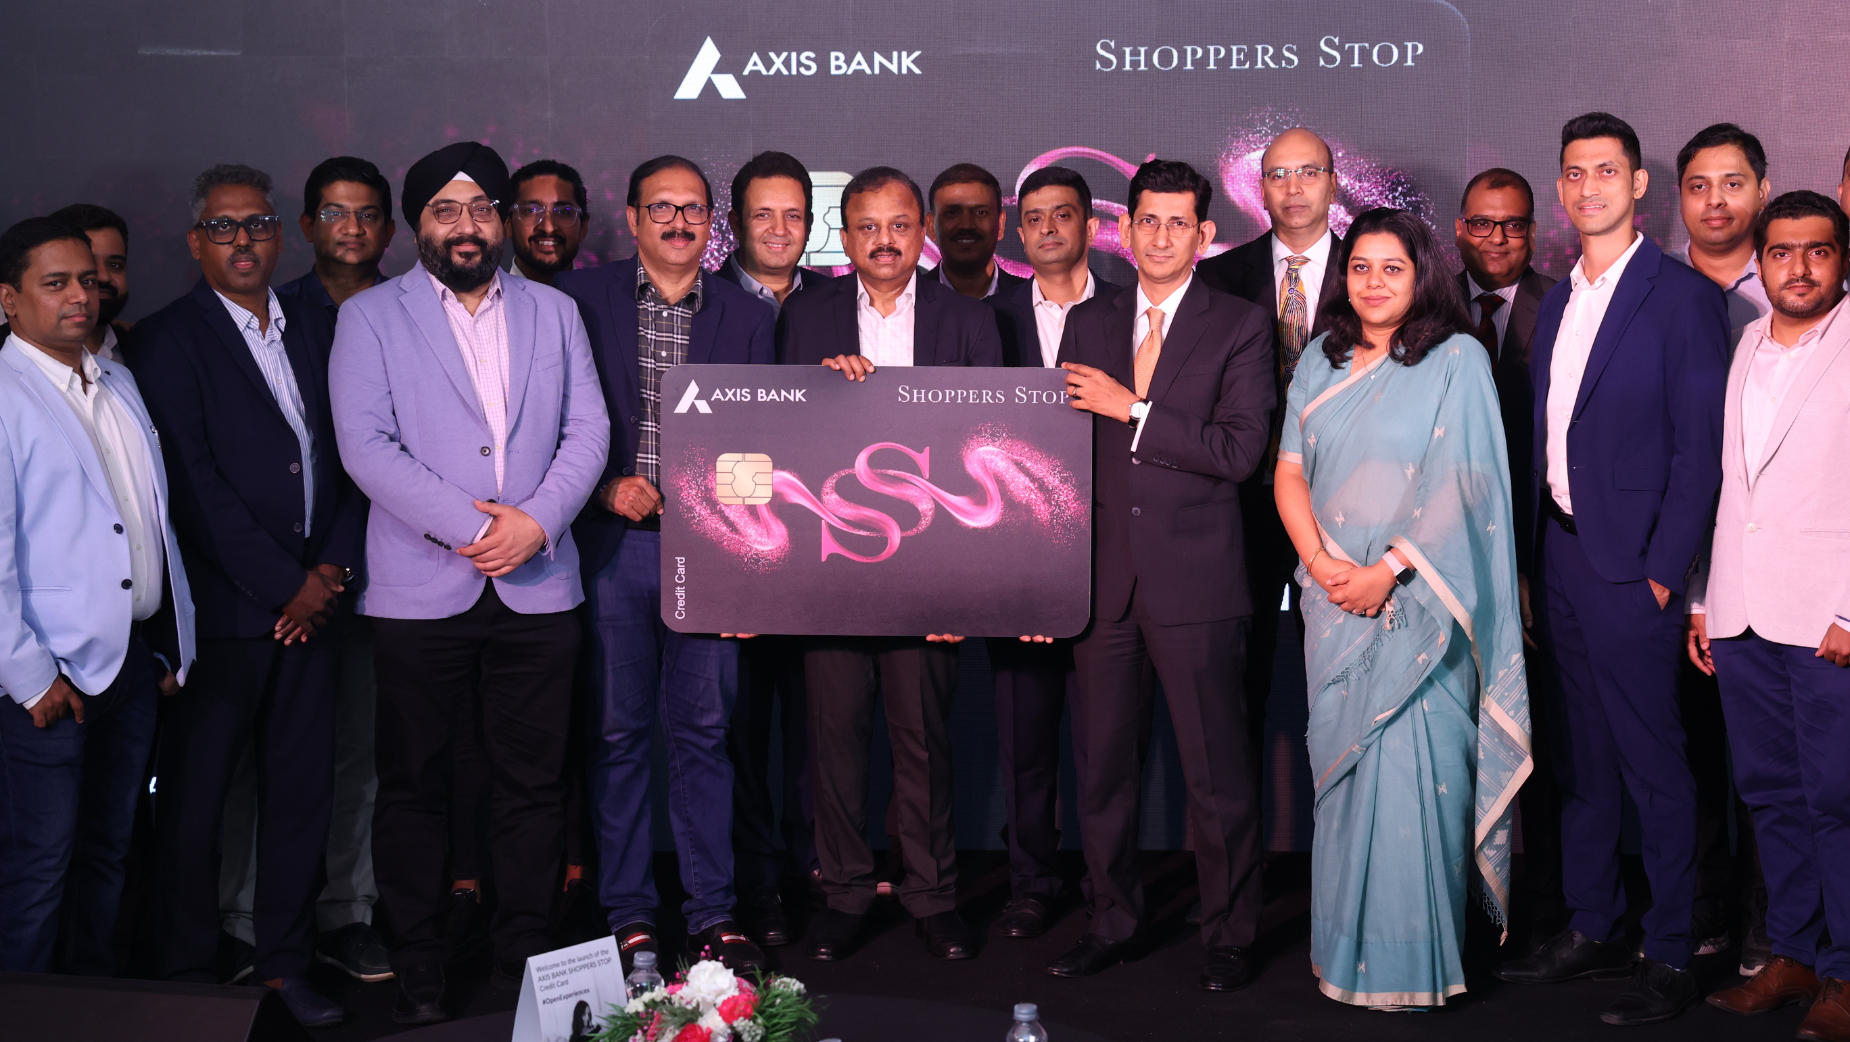 Axis Bank Expands Its Omni-Channel Shopping Segment through Its Credit Card Partnership with Shoppers Stop | LBBOnline